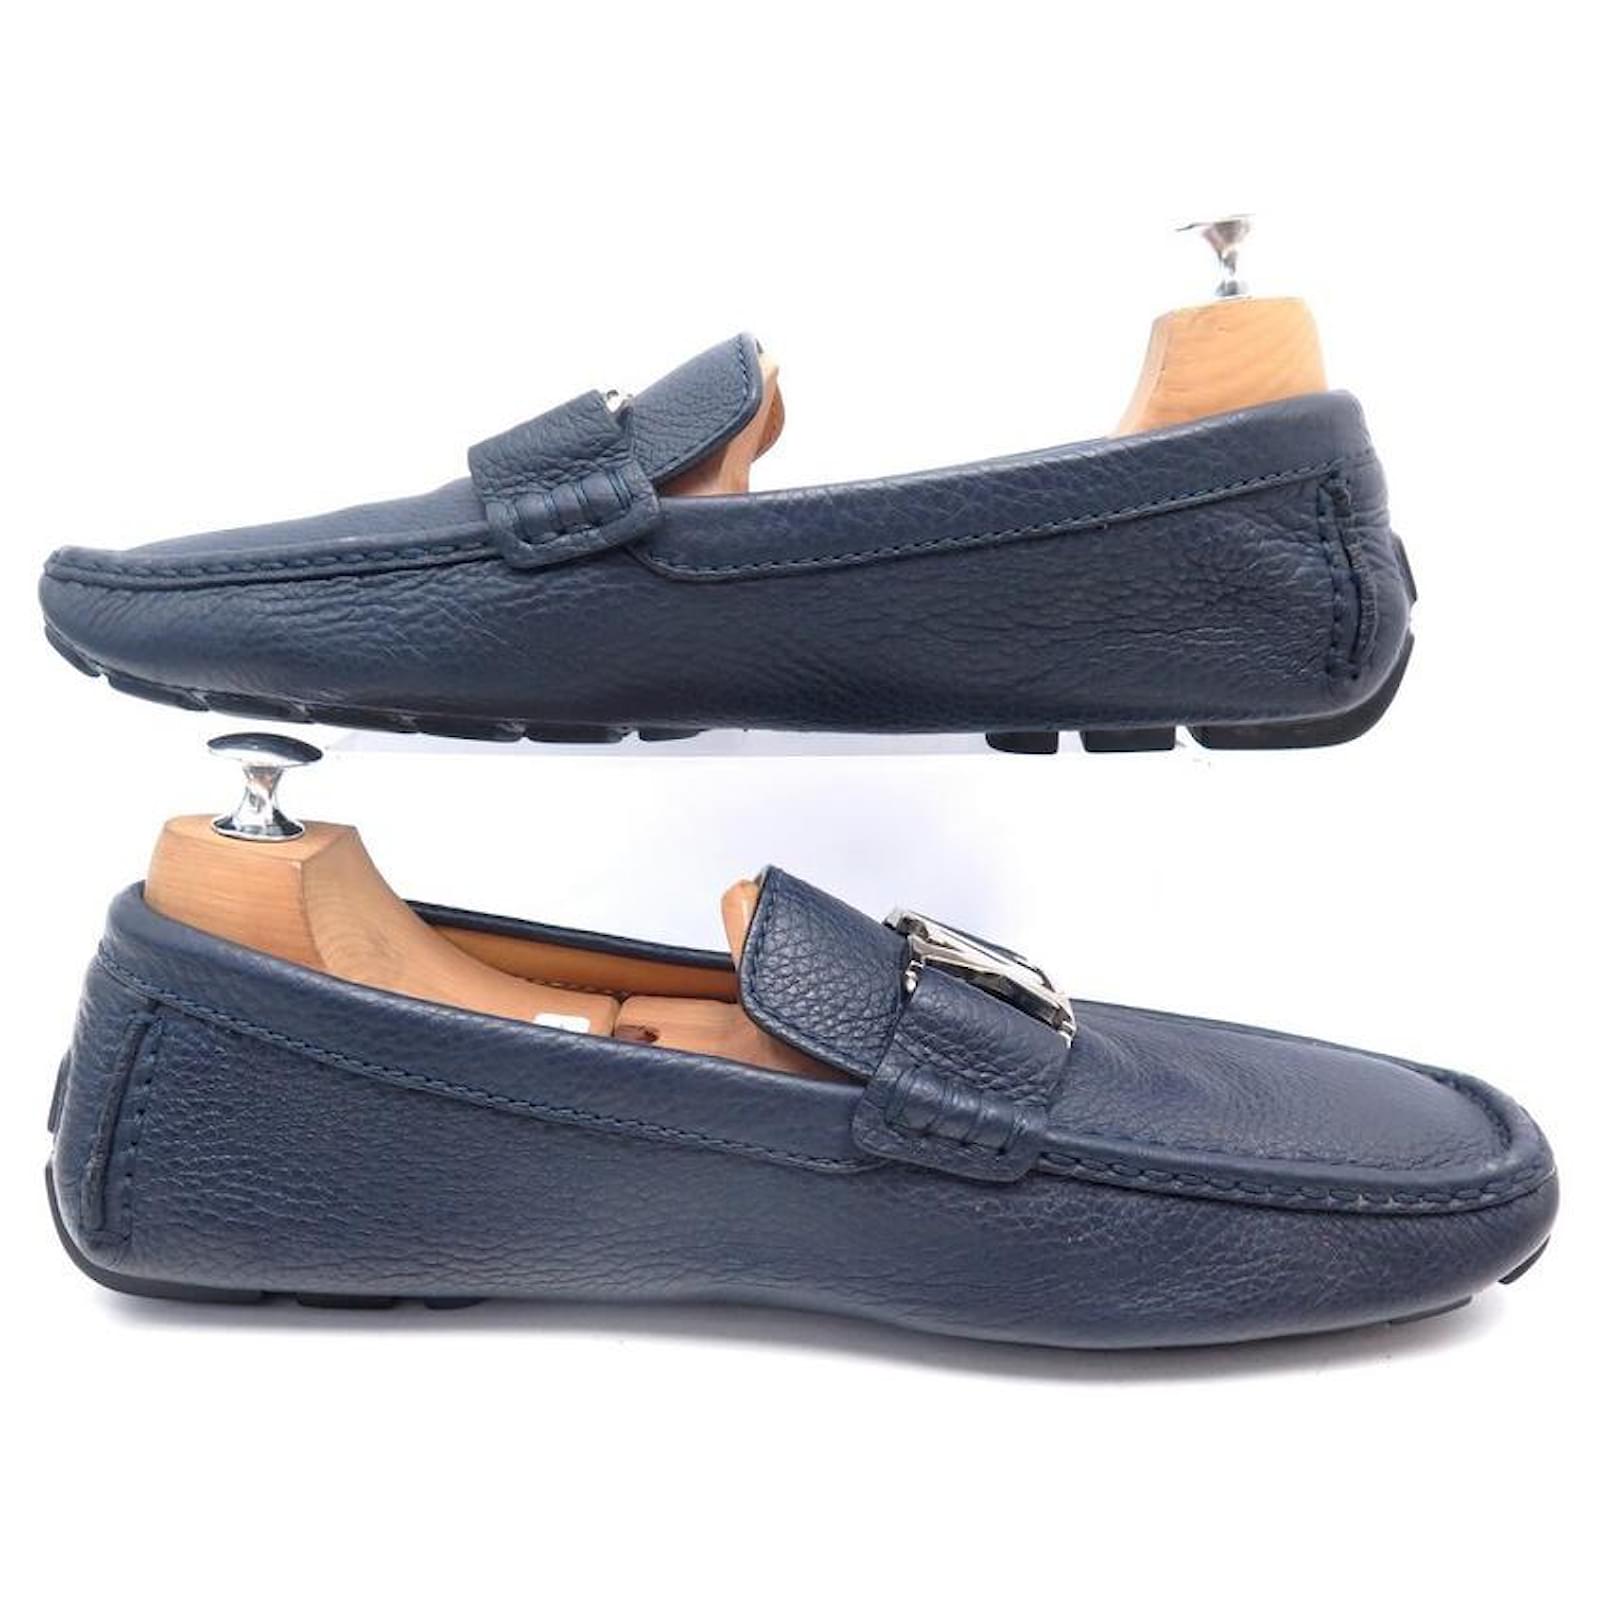 Louis Vuitton BLUE Monte Carlo TAIGA UK8.5 /US9.5 loafer shoes Authentic